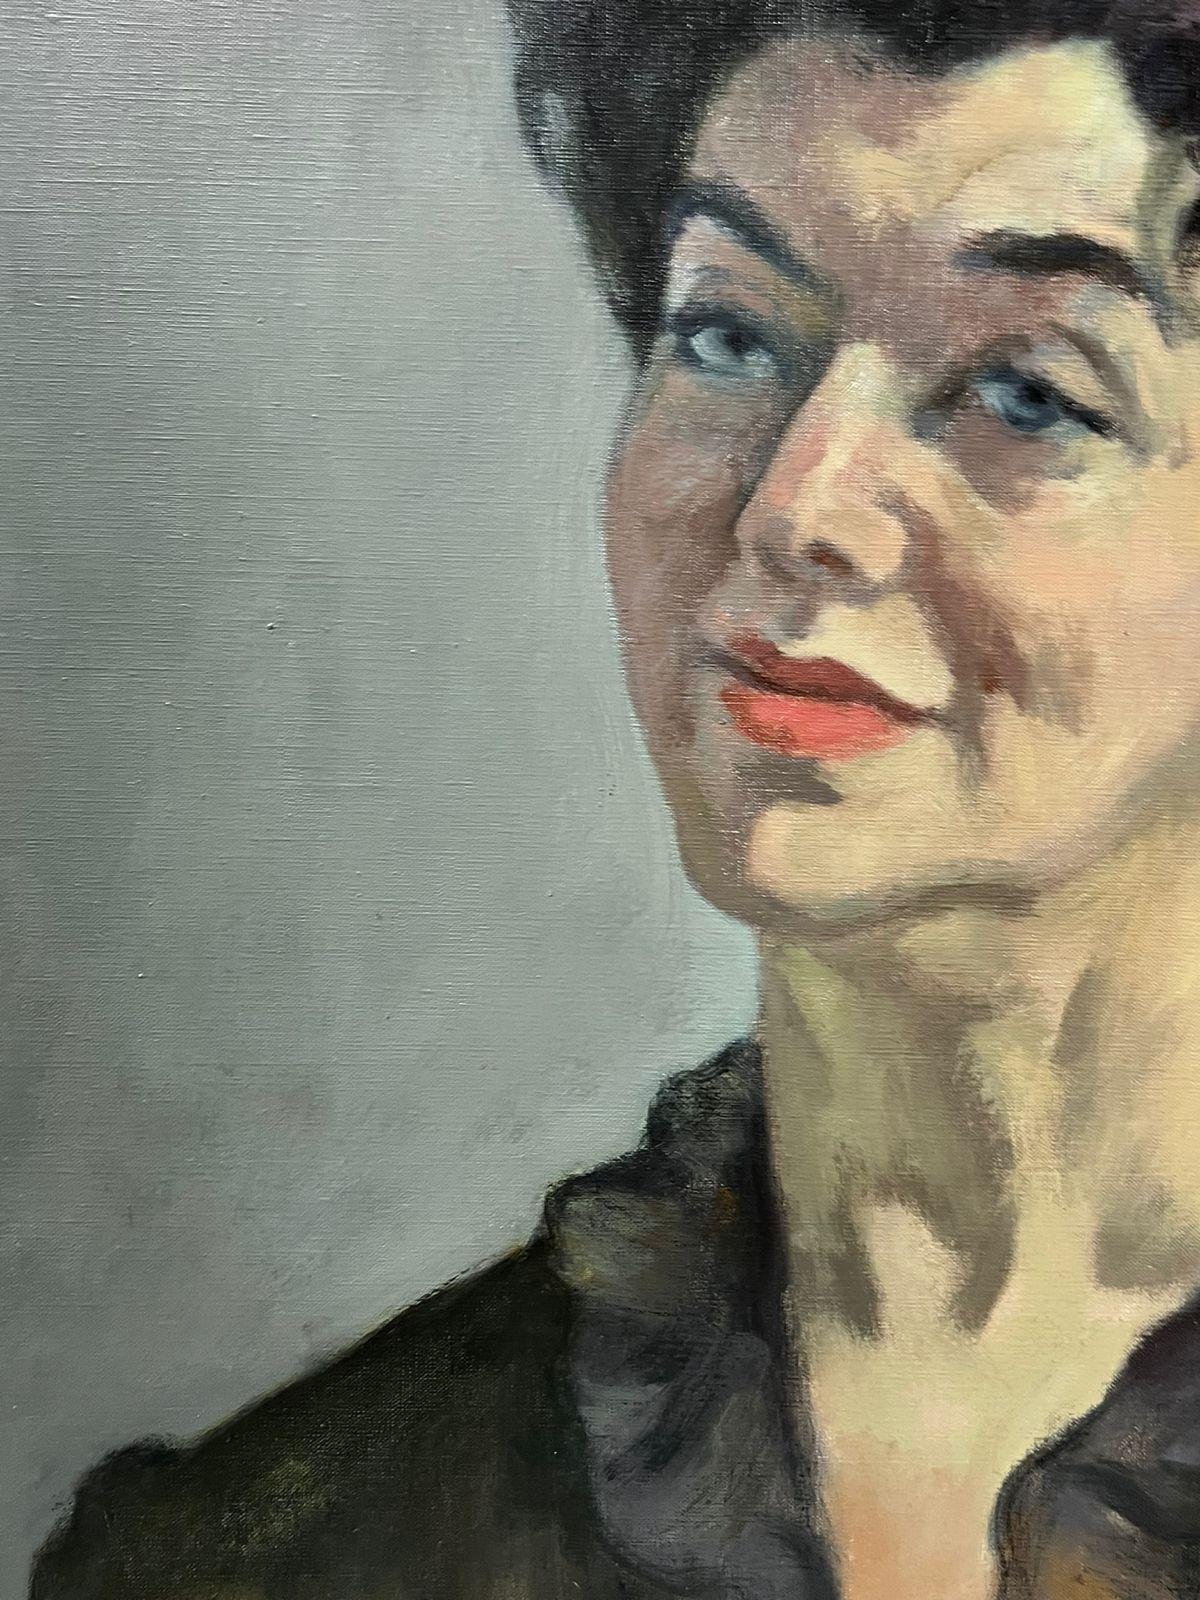 Portrait of a Lady
by Jacob Markiel (Polish 1911-2008) *See notes 
oil on canvas, unframed
canvas: 26 x 21.5 inches
provenance: the artists estate, south of France
condition: very good and sound condition

Jacob Markiel was born into a humble family